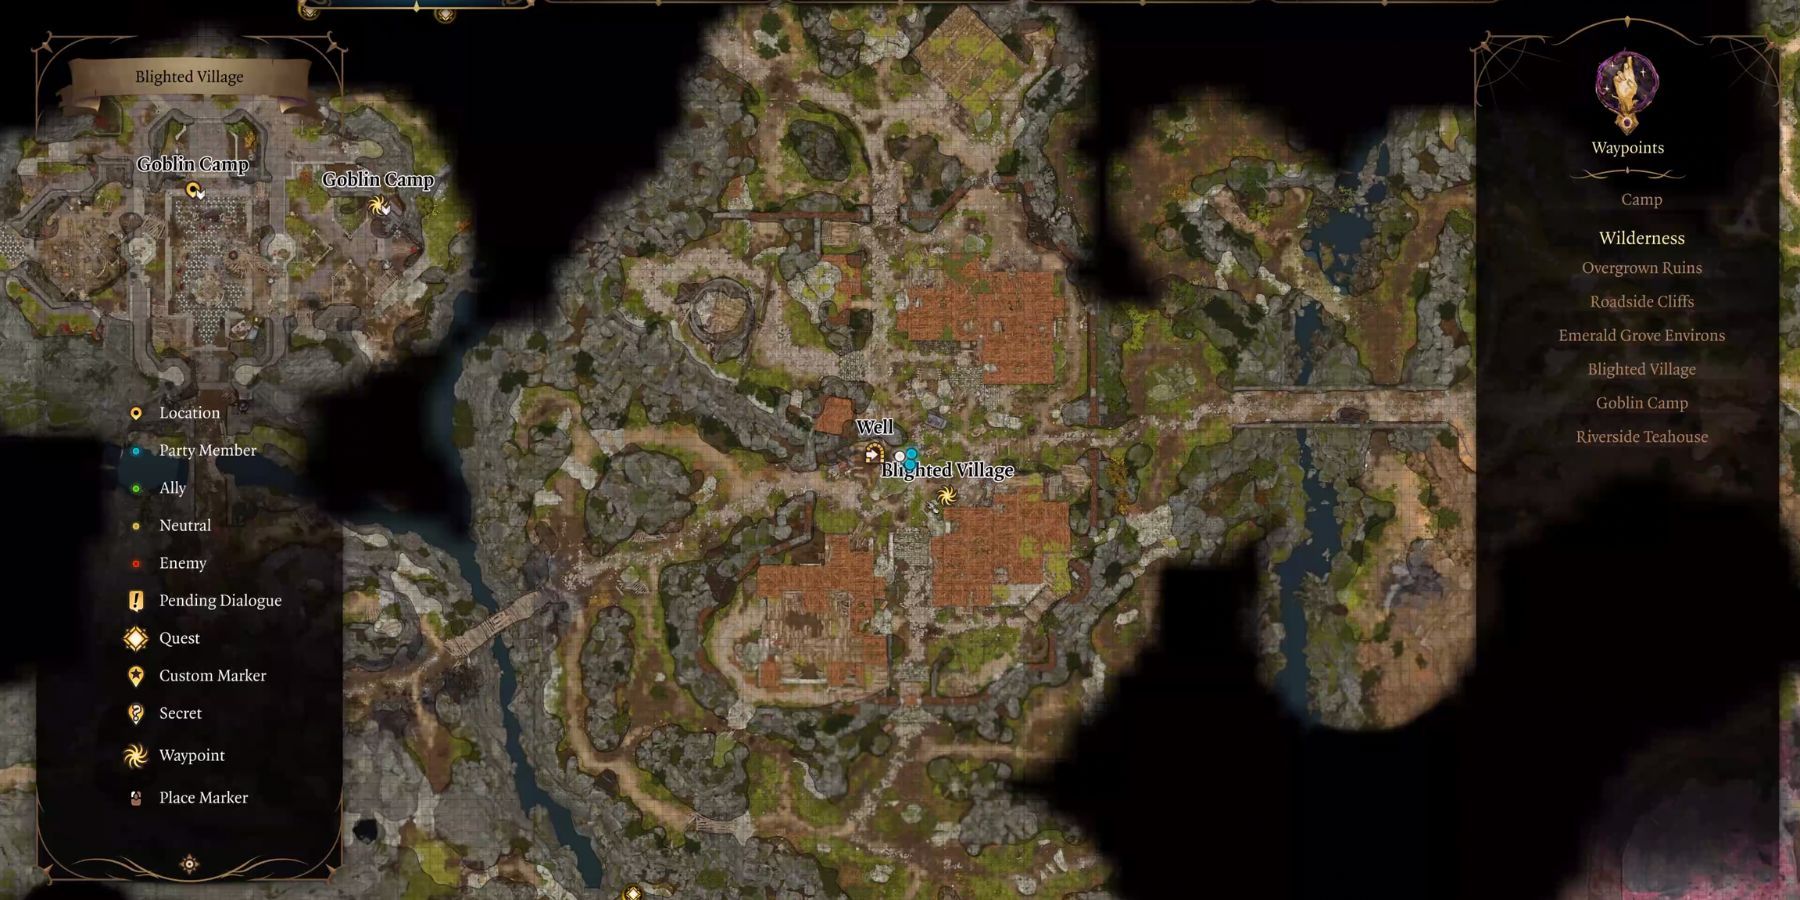 Baldur's Gate 3: the Blighted Village location on the map